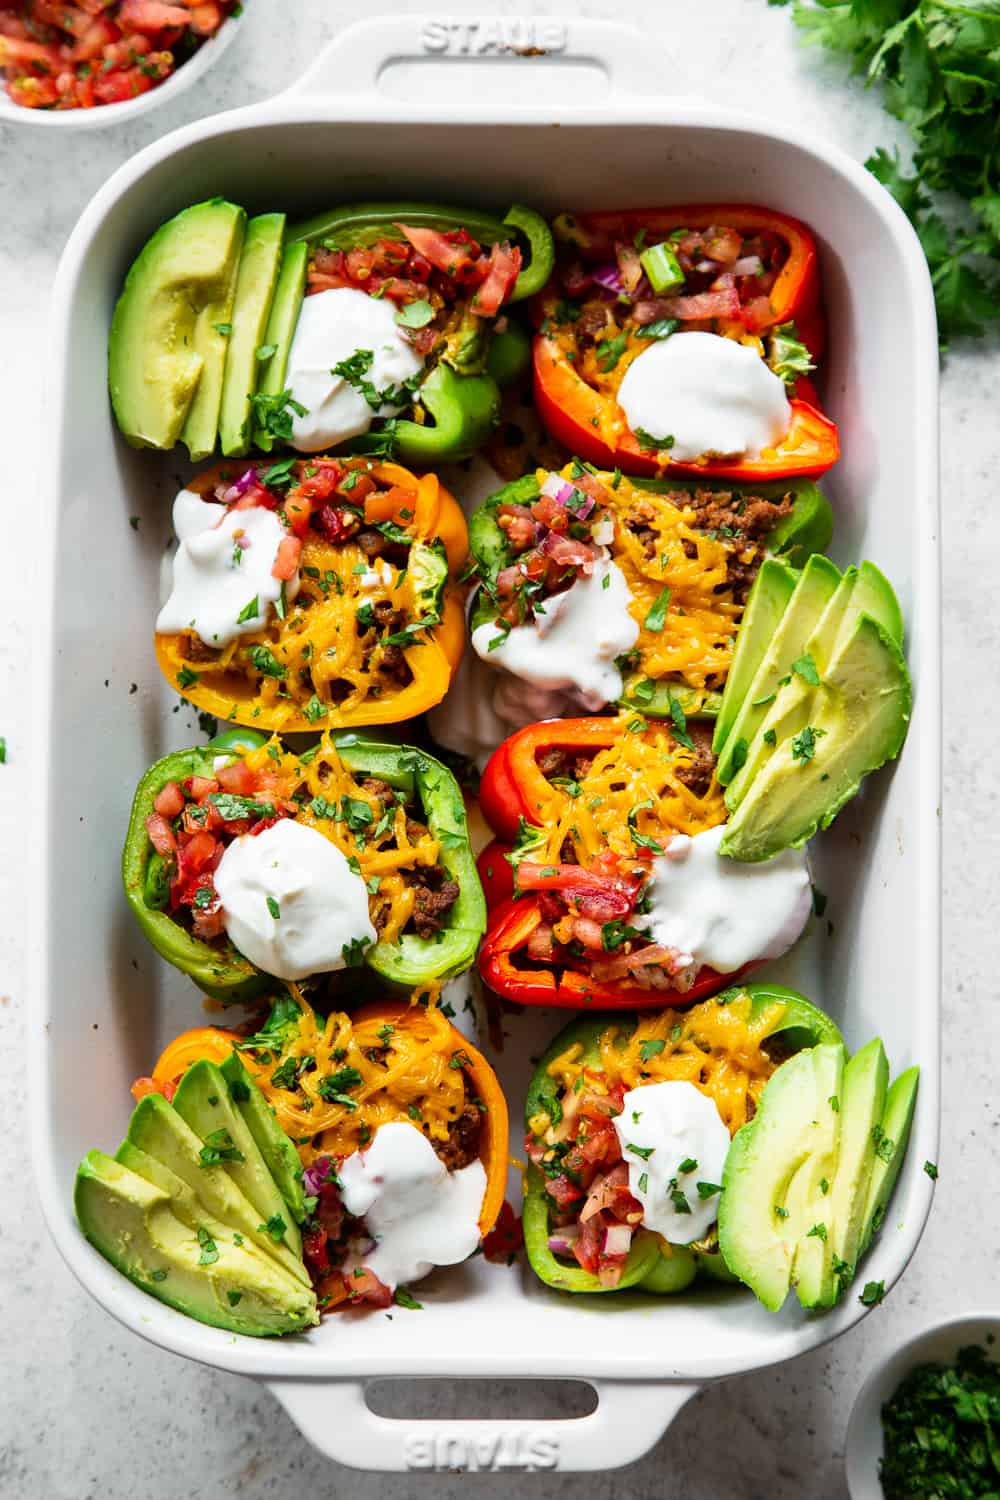 These Paleo Taco Stuffed Peppers are super easy to make and packed with goodies! Bell peppers are filled with the best taco meat and topped with vegan cheese, baked, and topped with all your favorites like fresh pico de Gallo, avocado and dairy free sour cream. Paleo, dairy free and keto friendly. #paleo #keto #cleaneating #lowcarb